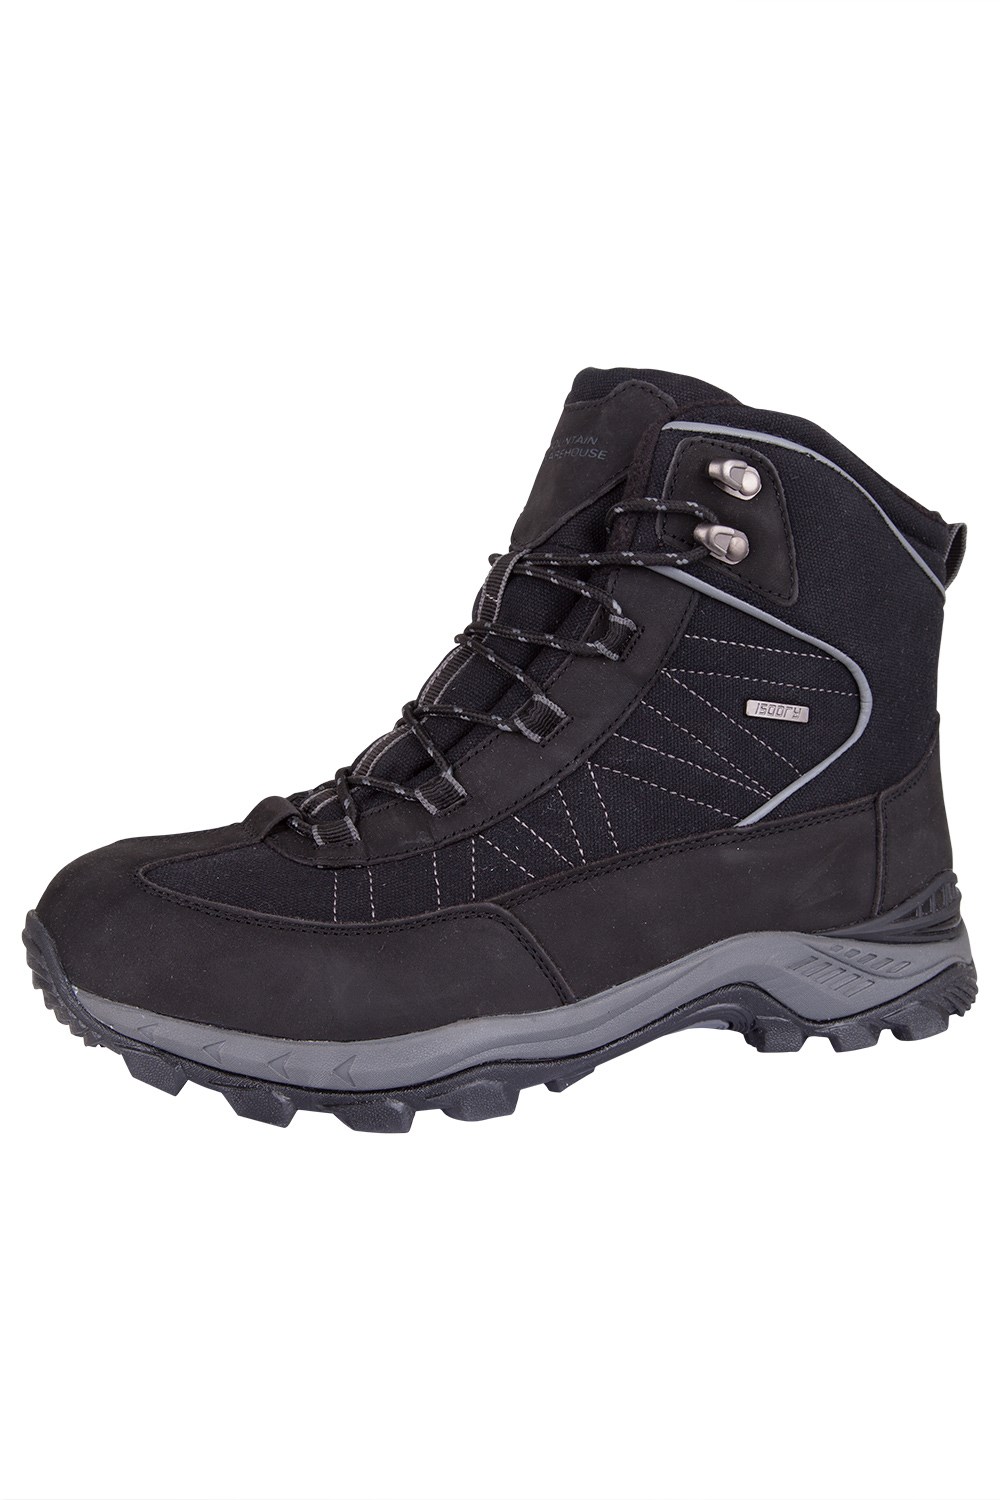 Mountain Warehouse Mens Boots with IsoDry Waterproof & IsoTherm ...